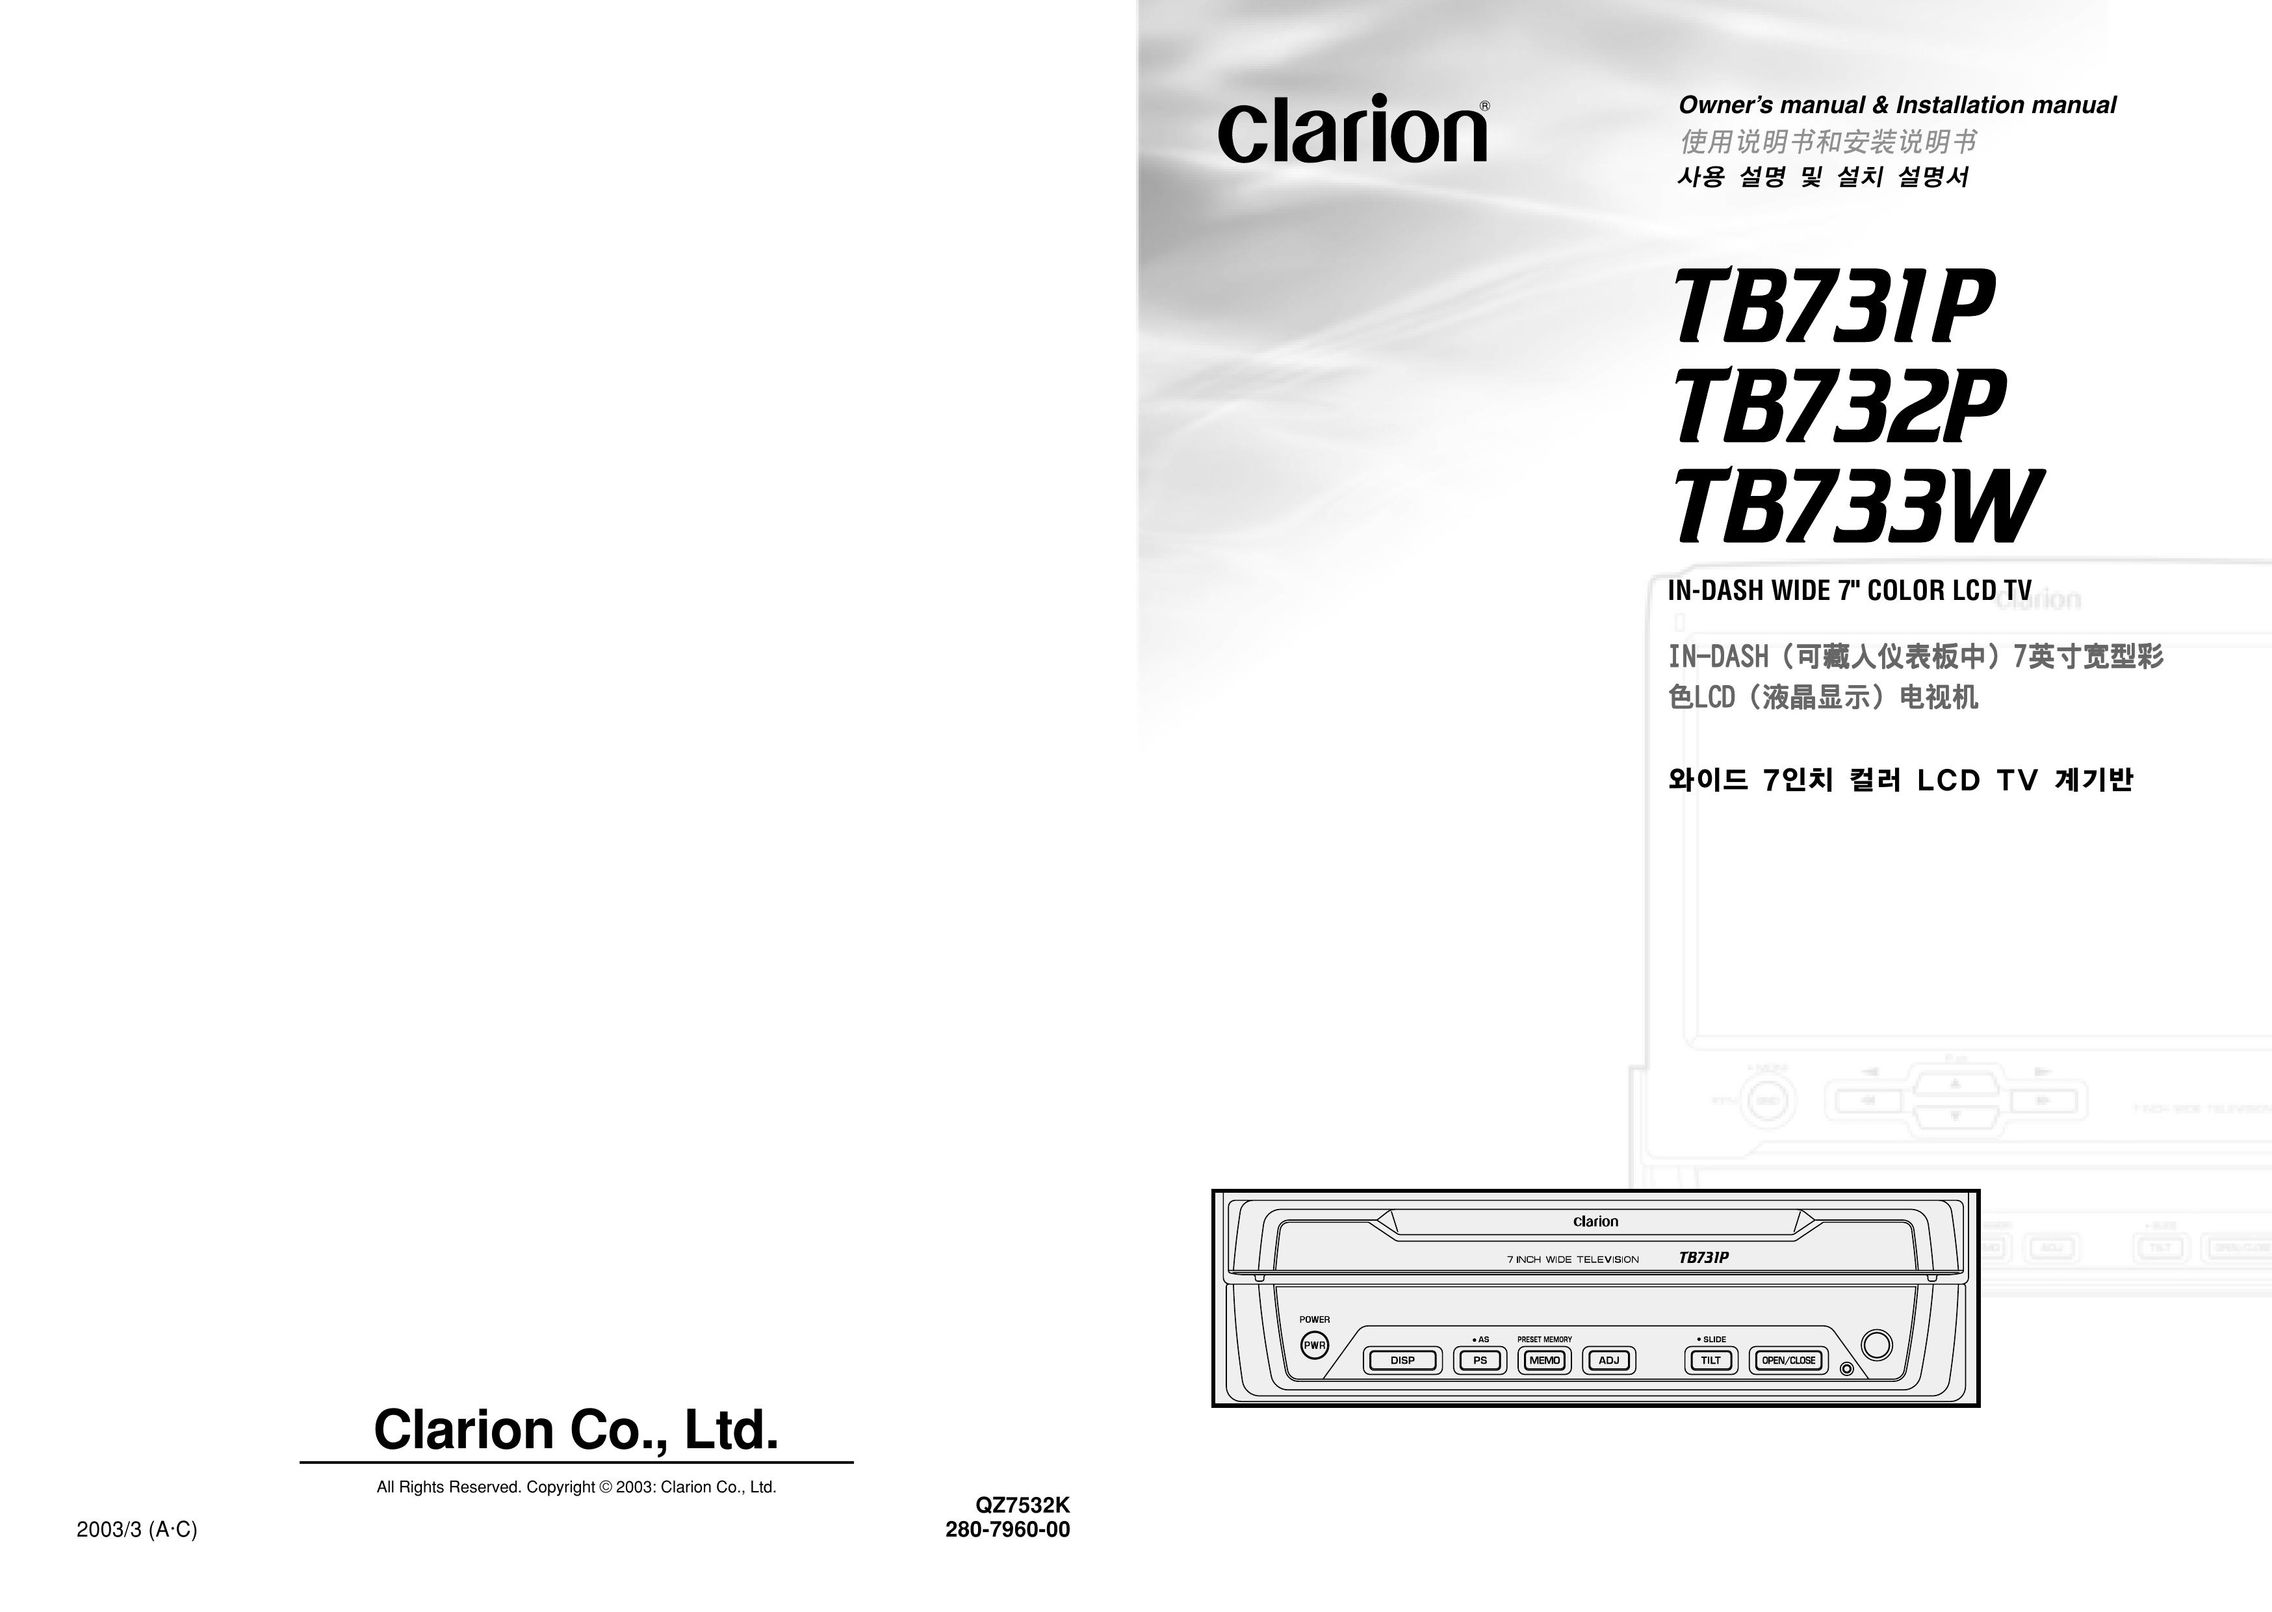 Clarion TB731P Flat Panel Television User Manual